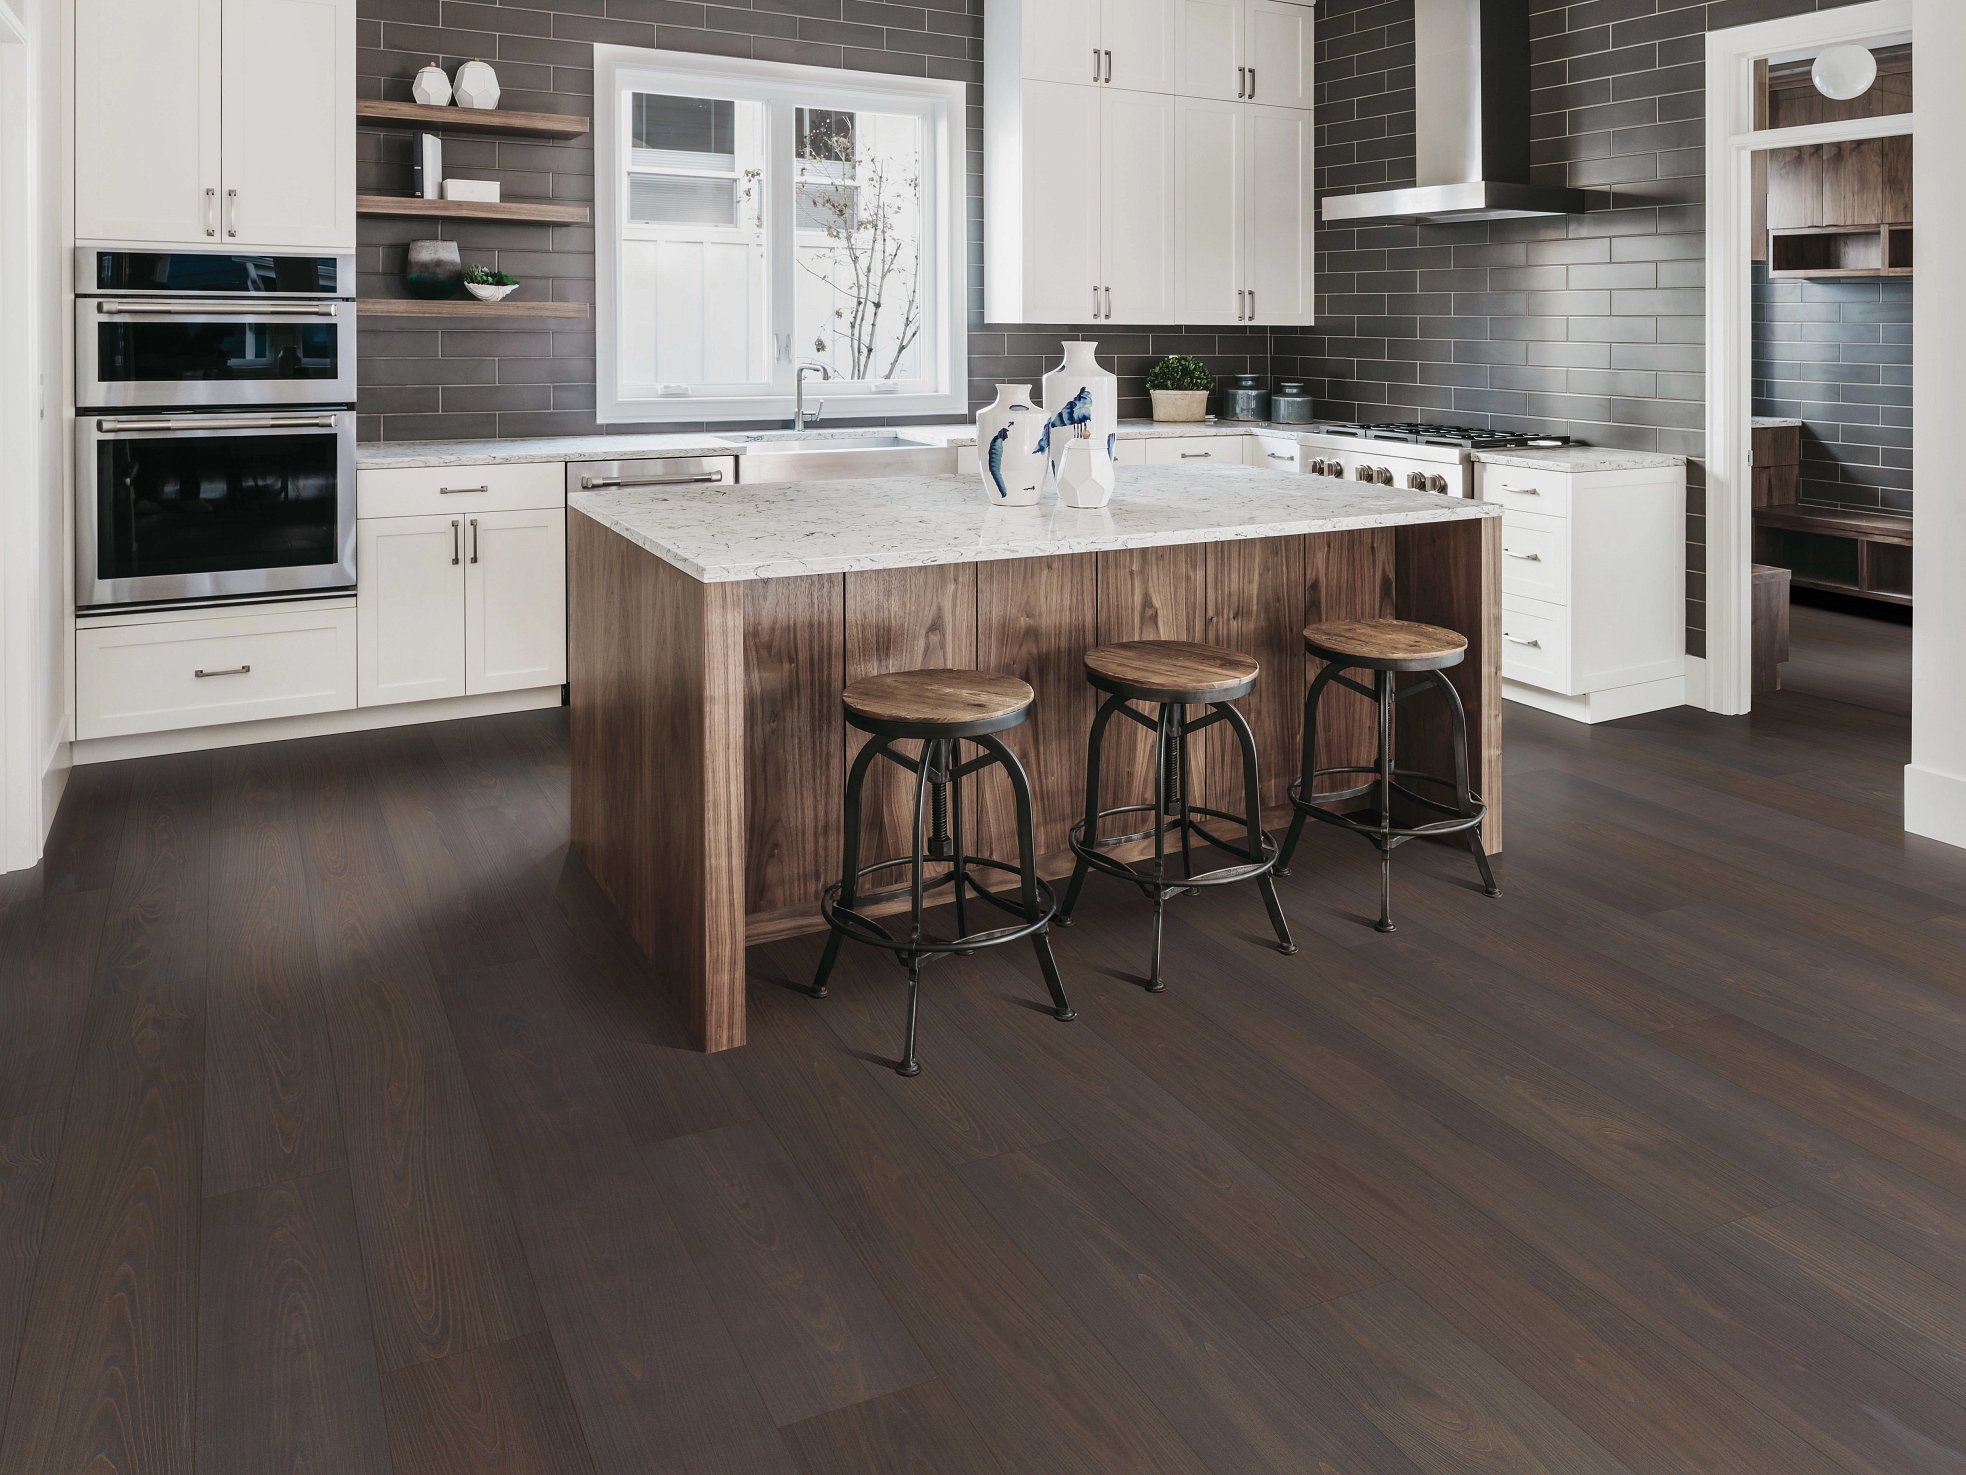 wood floor in the kitchen - Zinz Design in Youngstown, OH